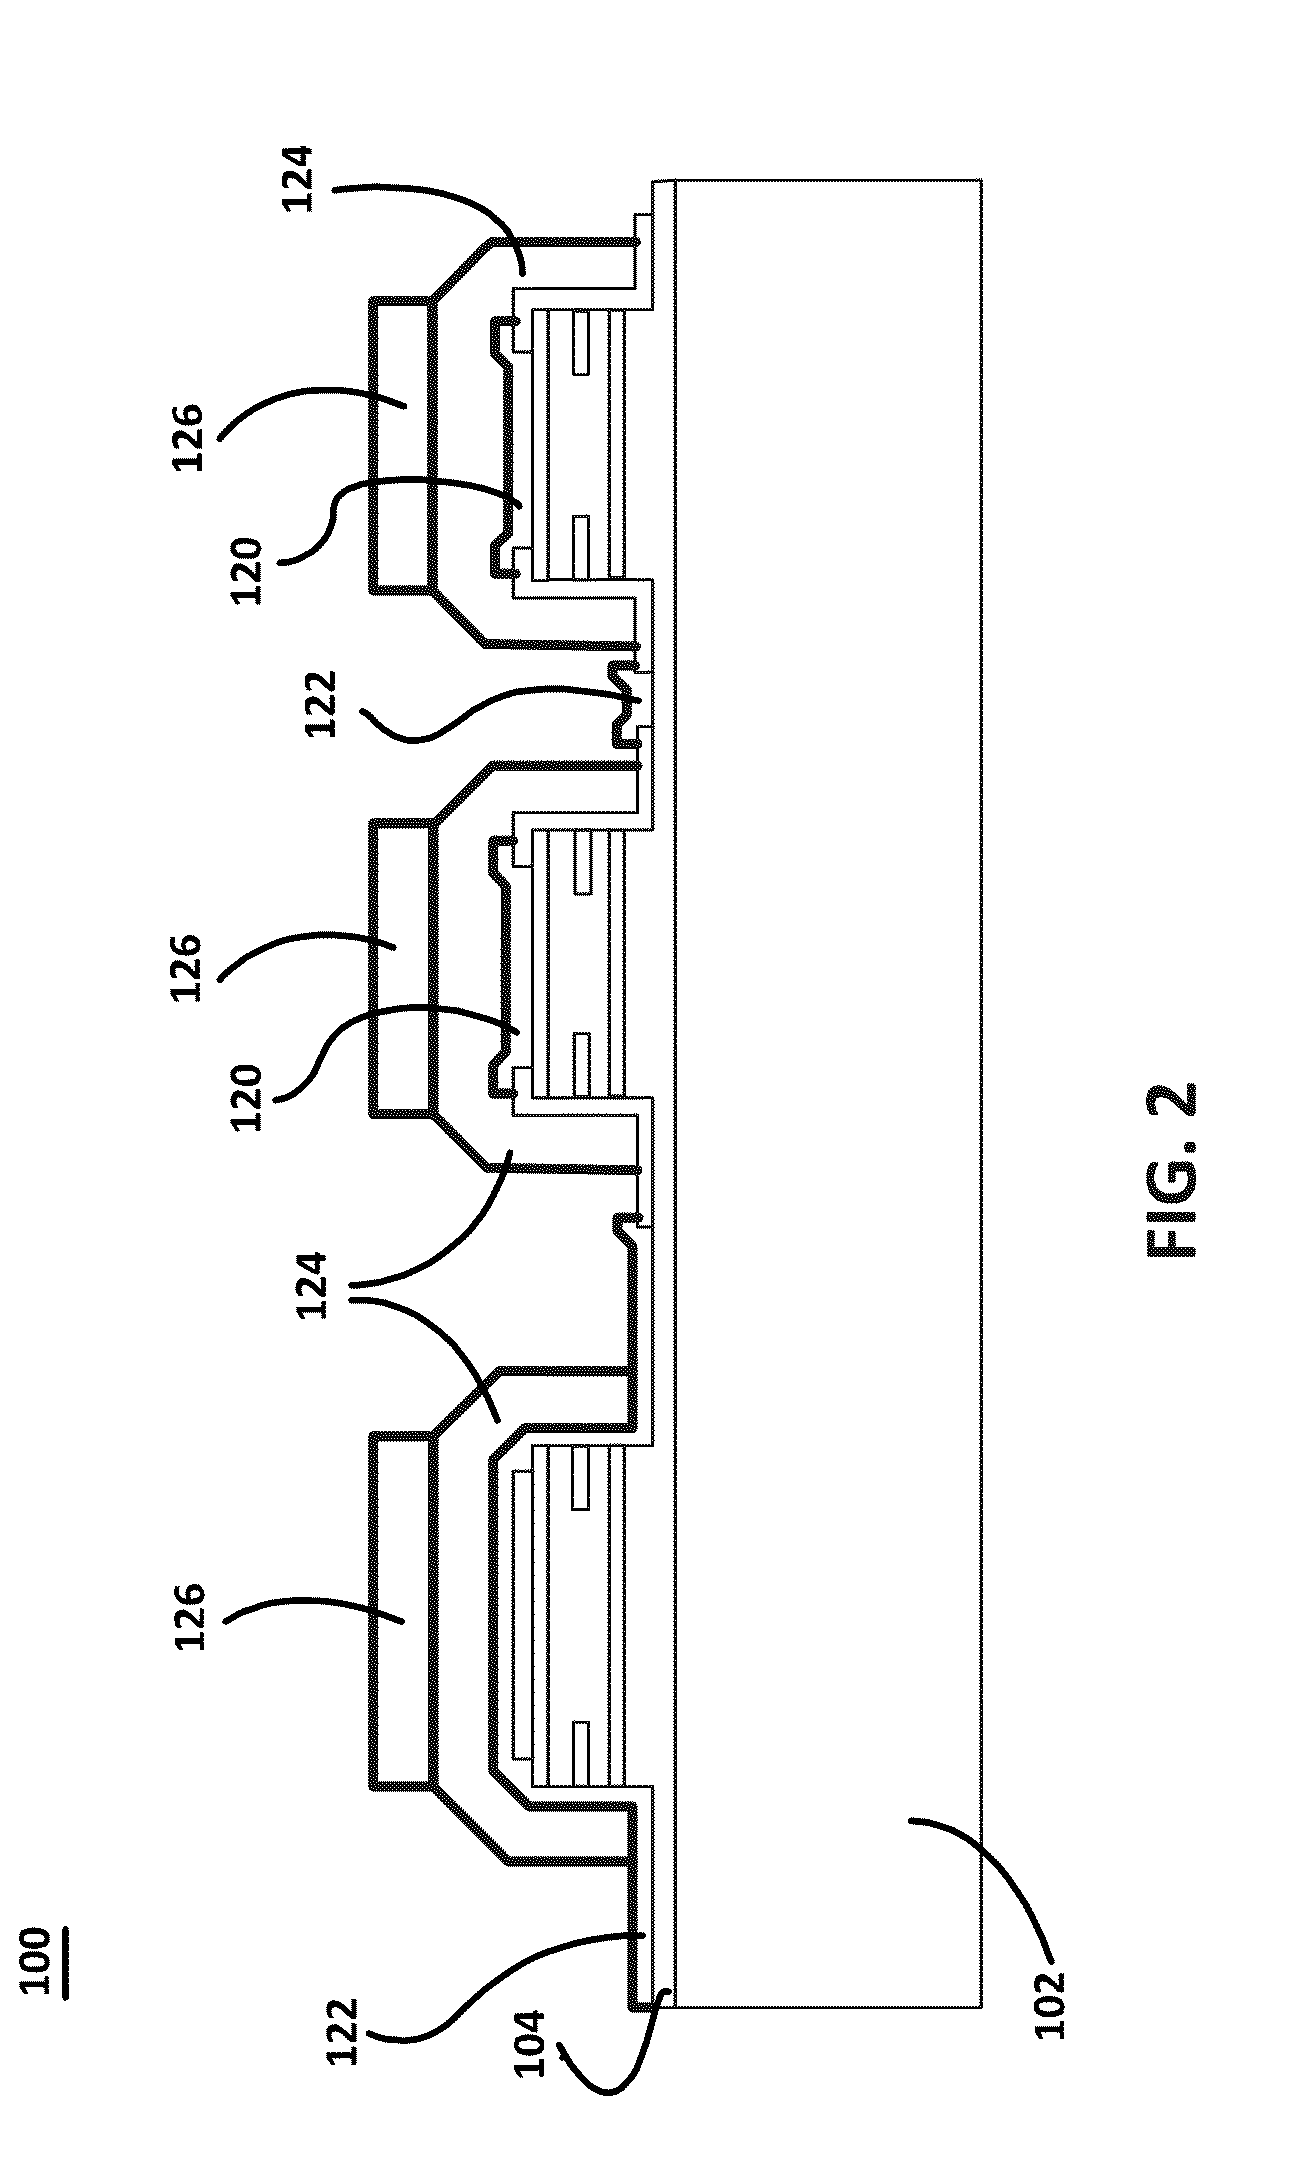 Multibeam Arrays of Optoelectronic Devices for High Frequency Operation